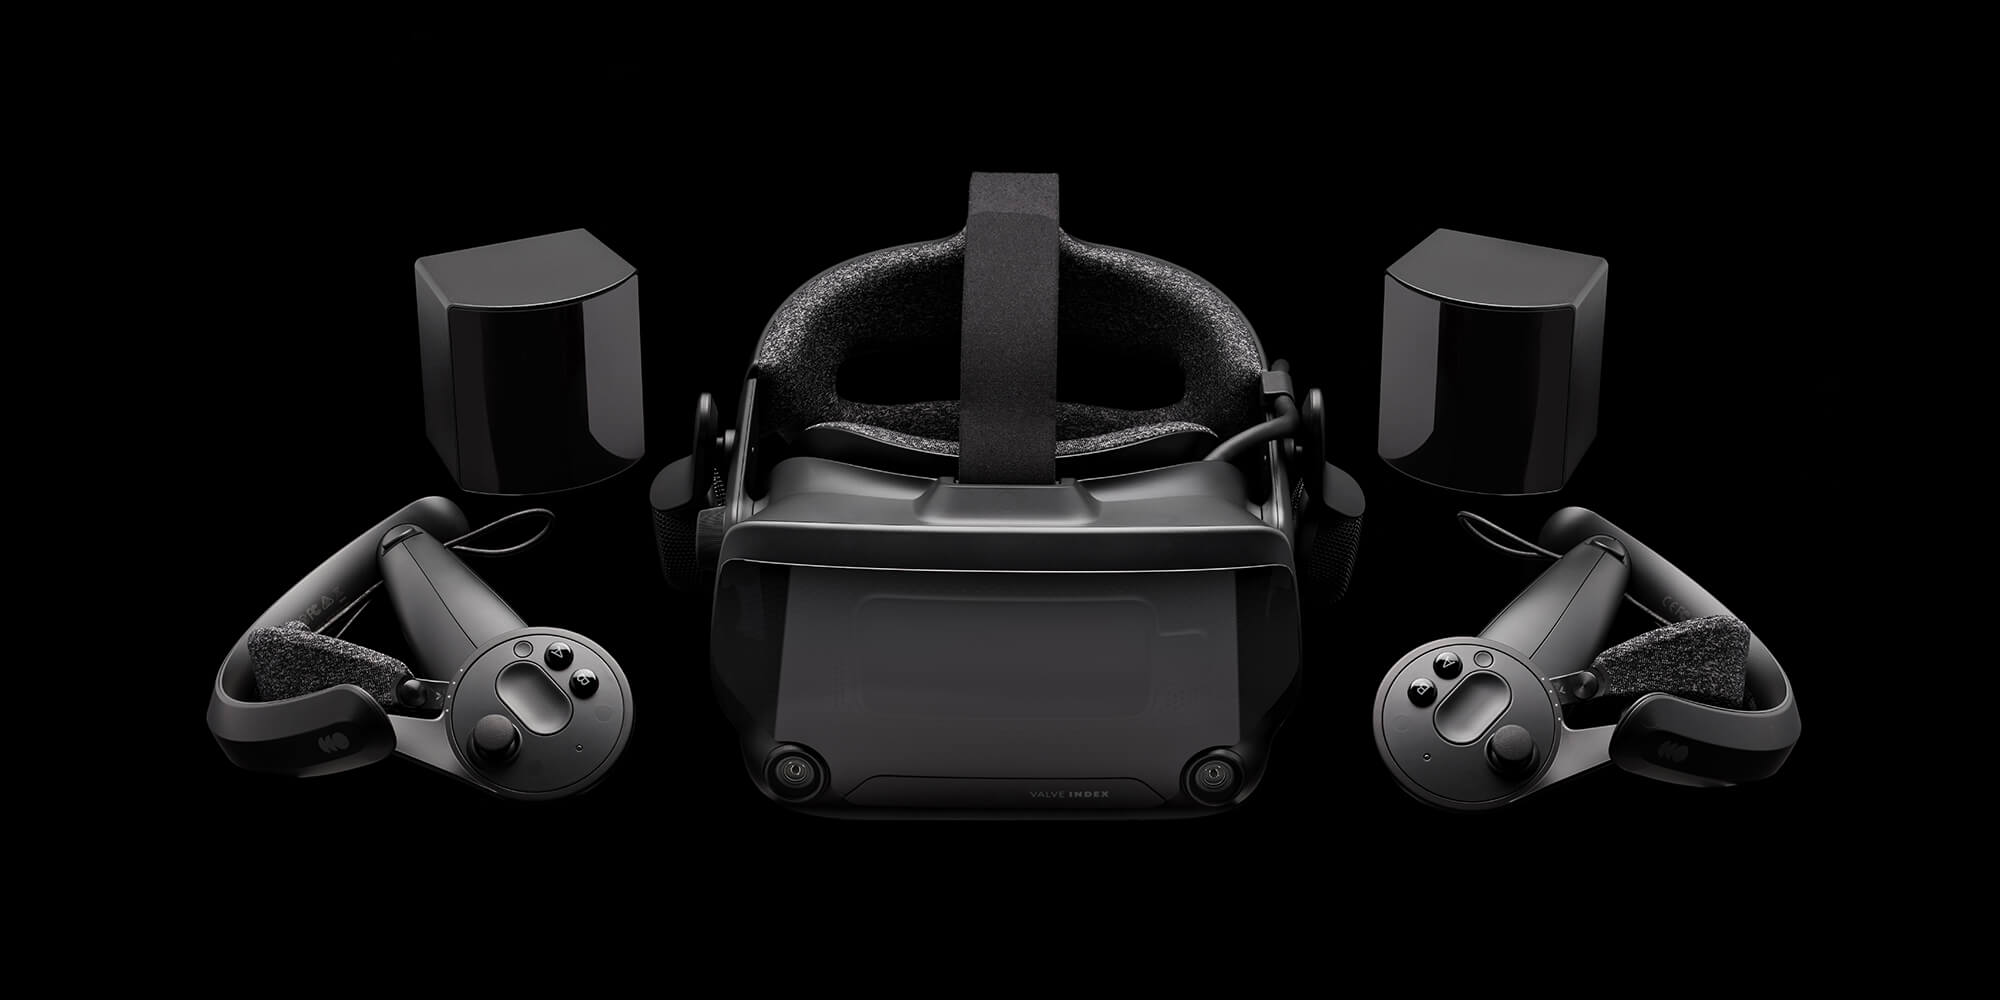 Is The Valve Index Worth it in 2022?